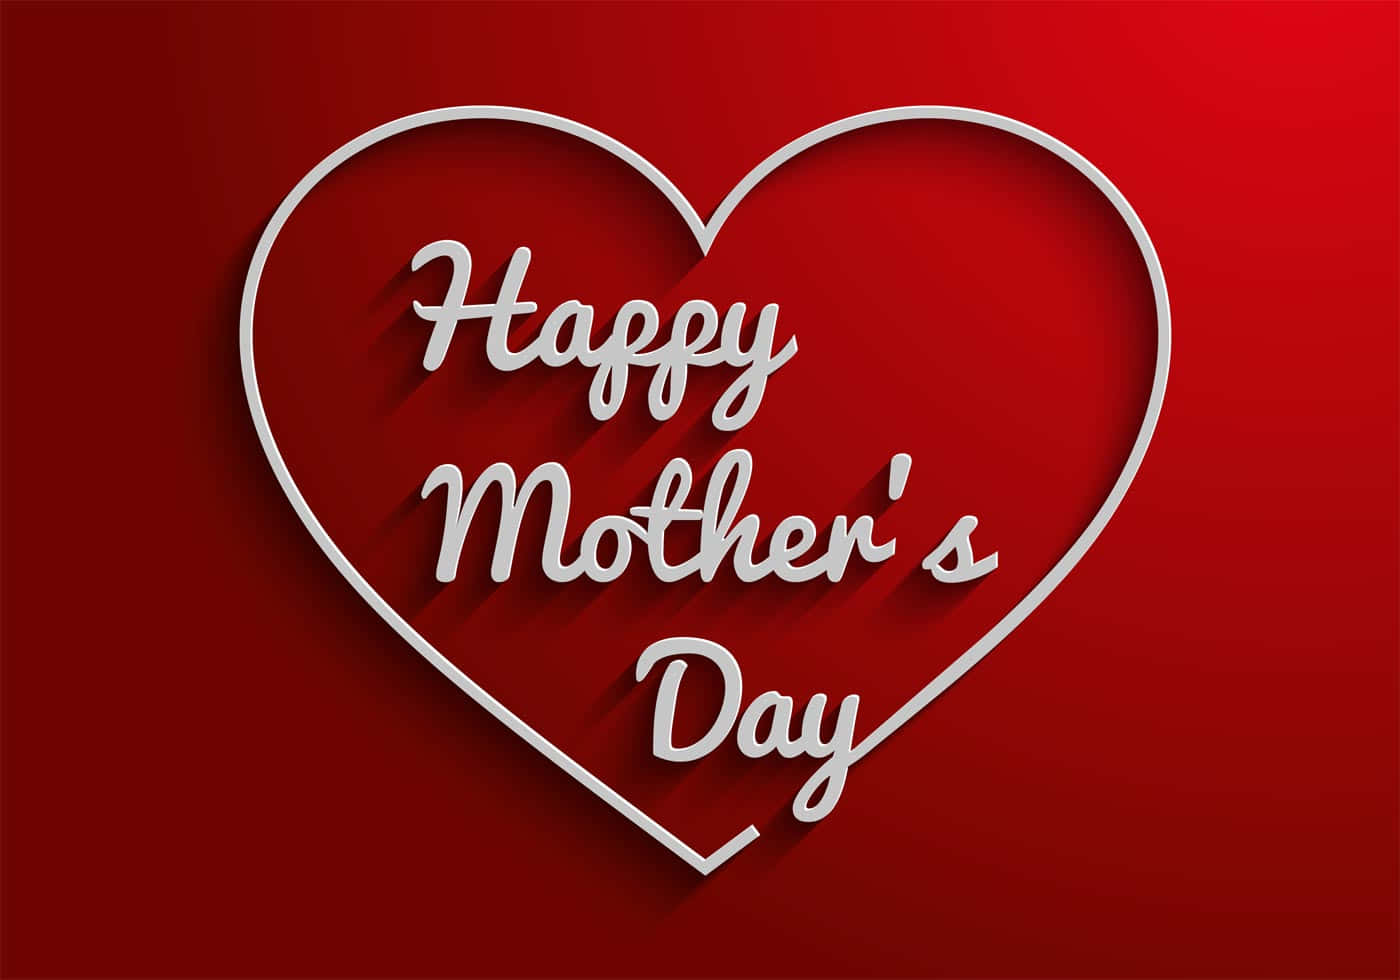 Honor your mother on this special day!